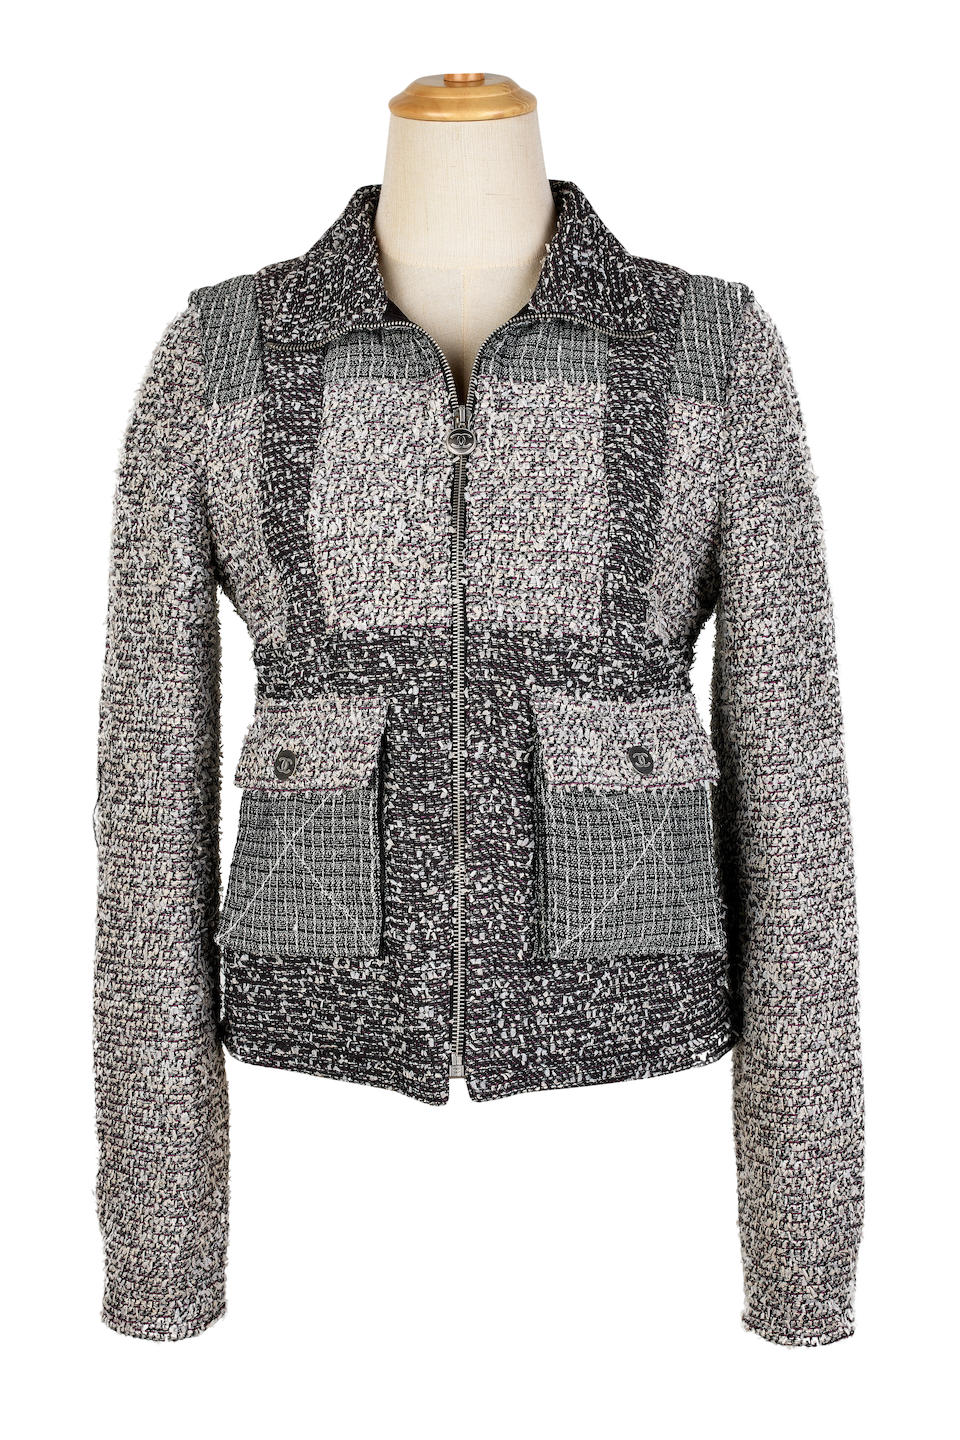 CHANEL: GREY BLACK WHITE TWEED ZIP CLOSURE JACKET WITH CC LOGO BUTTONS AND PADDED LINING